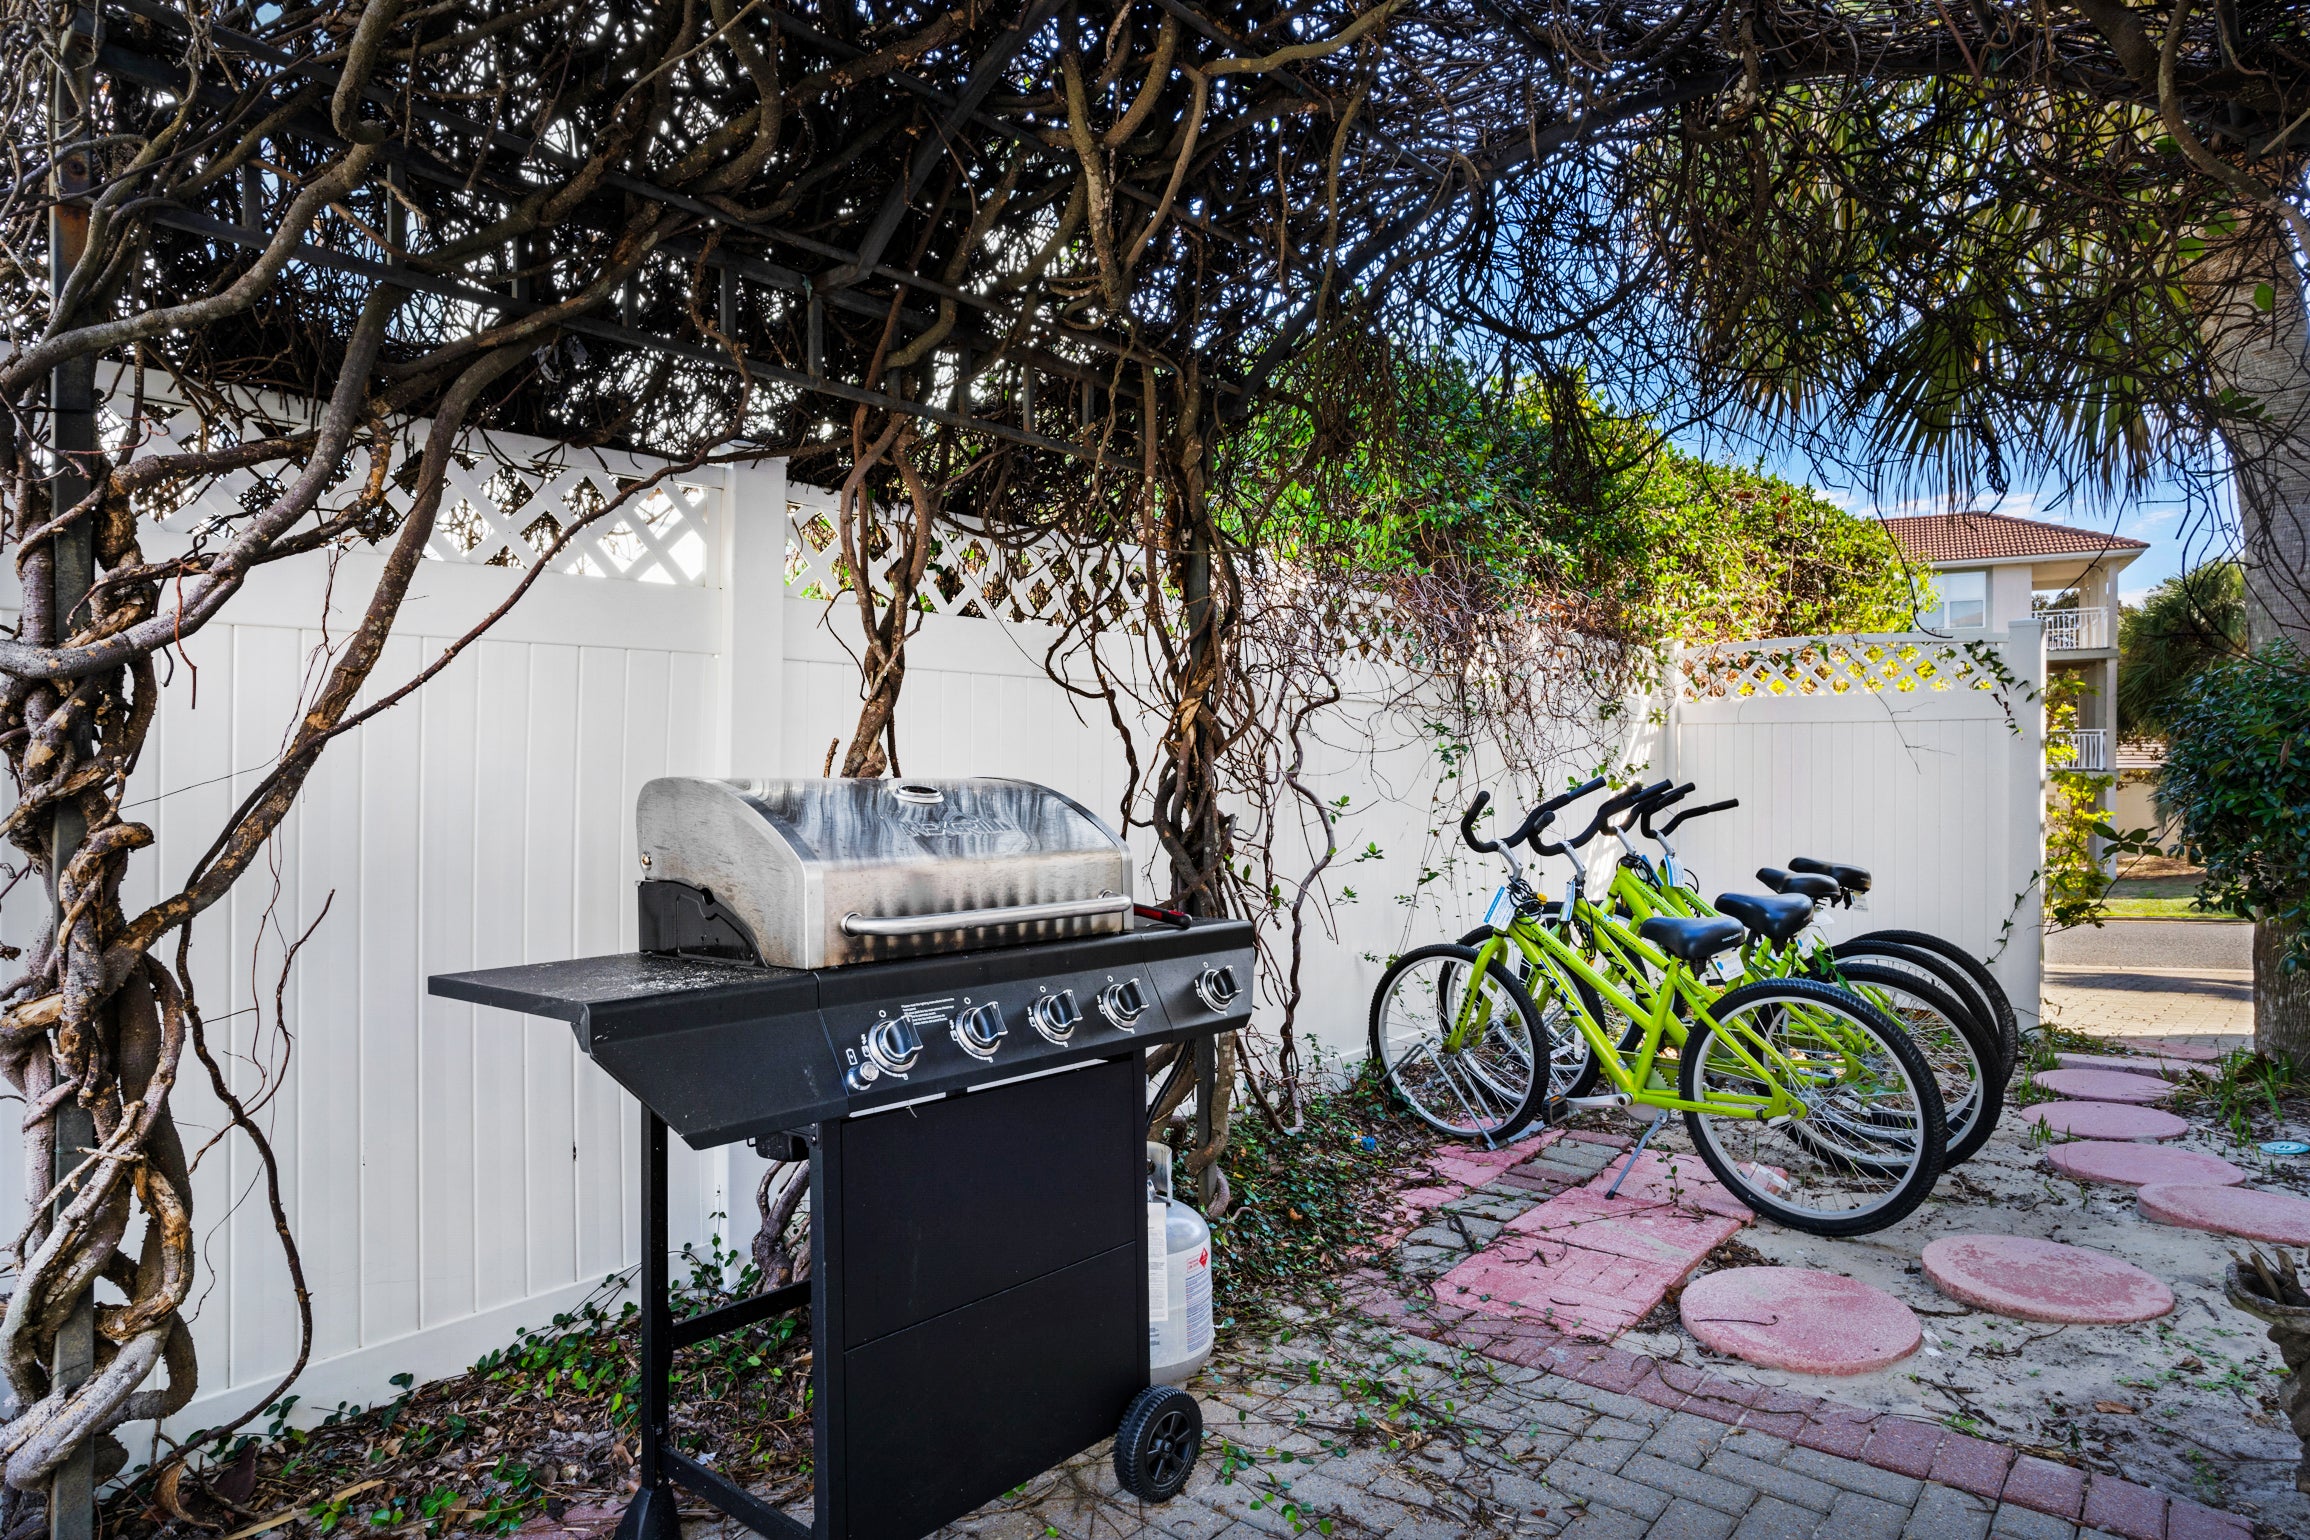 Grill out or take the bikes out for a ride